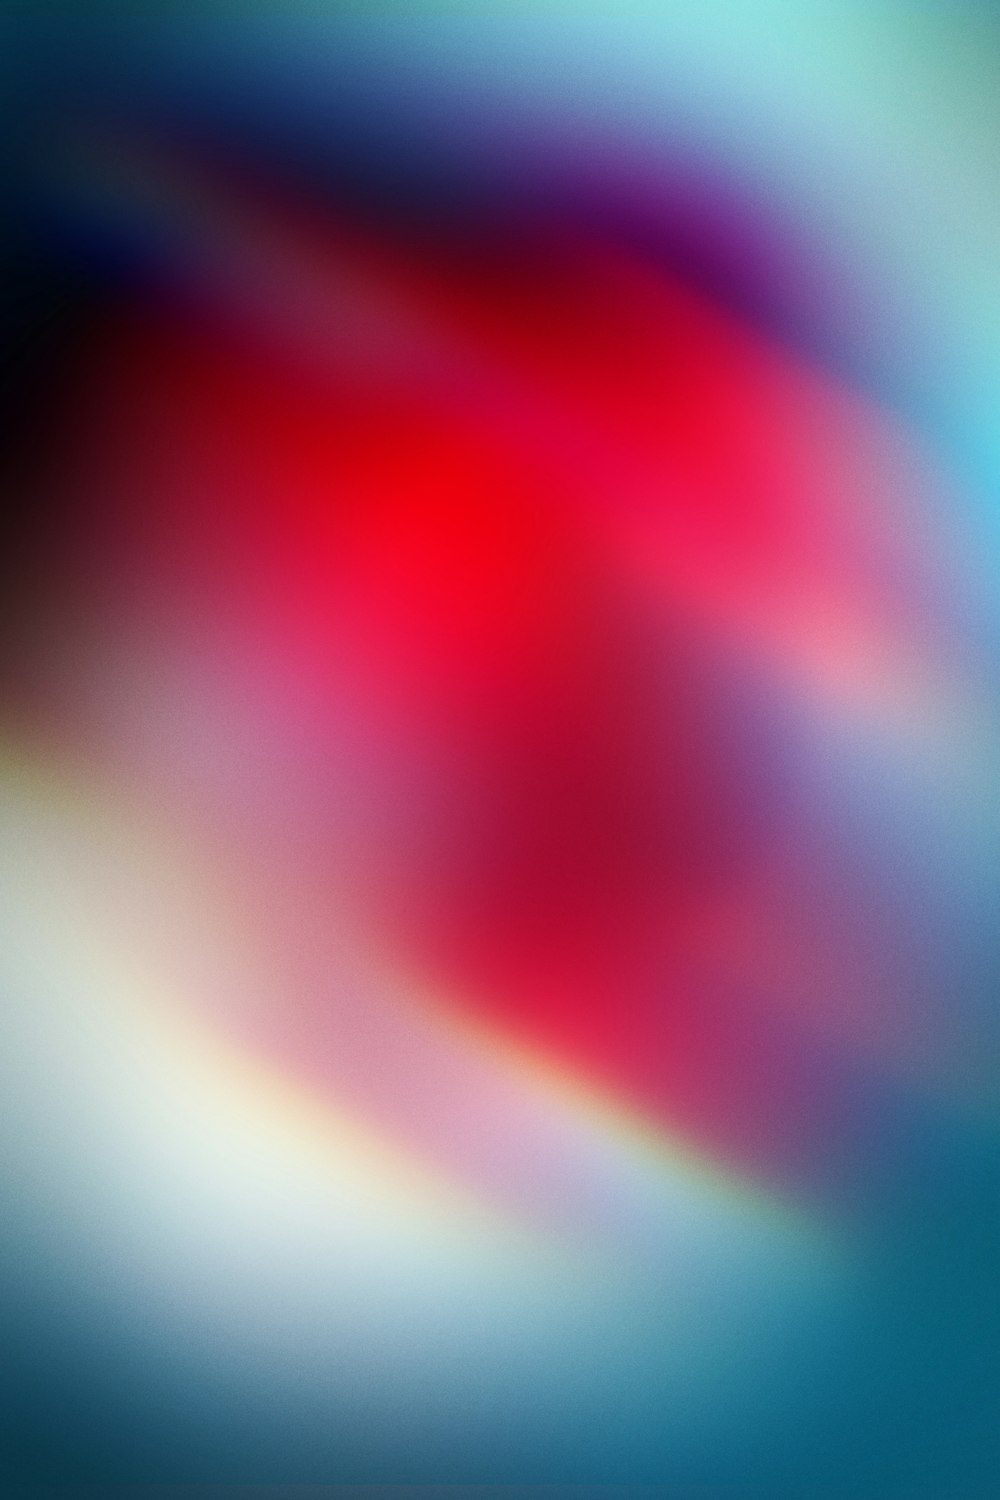 a blurry image of a red and blue background